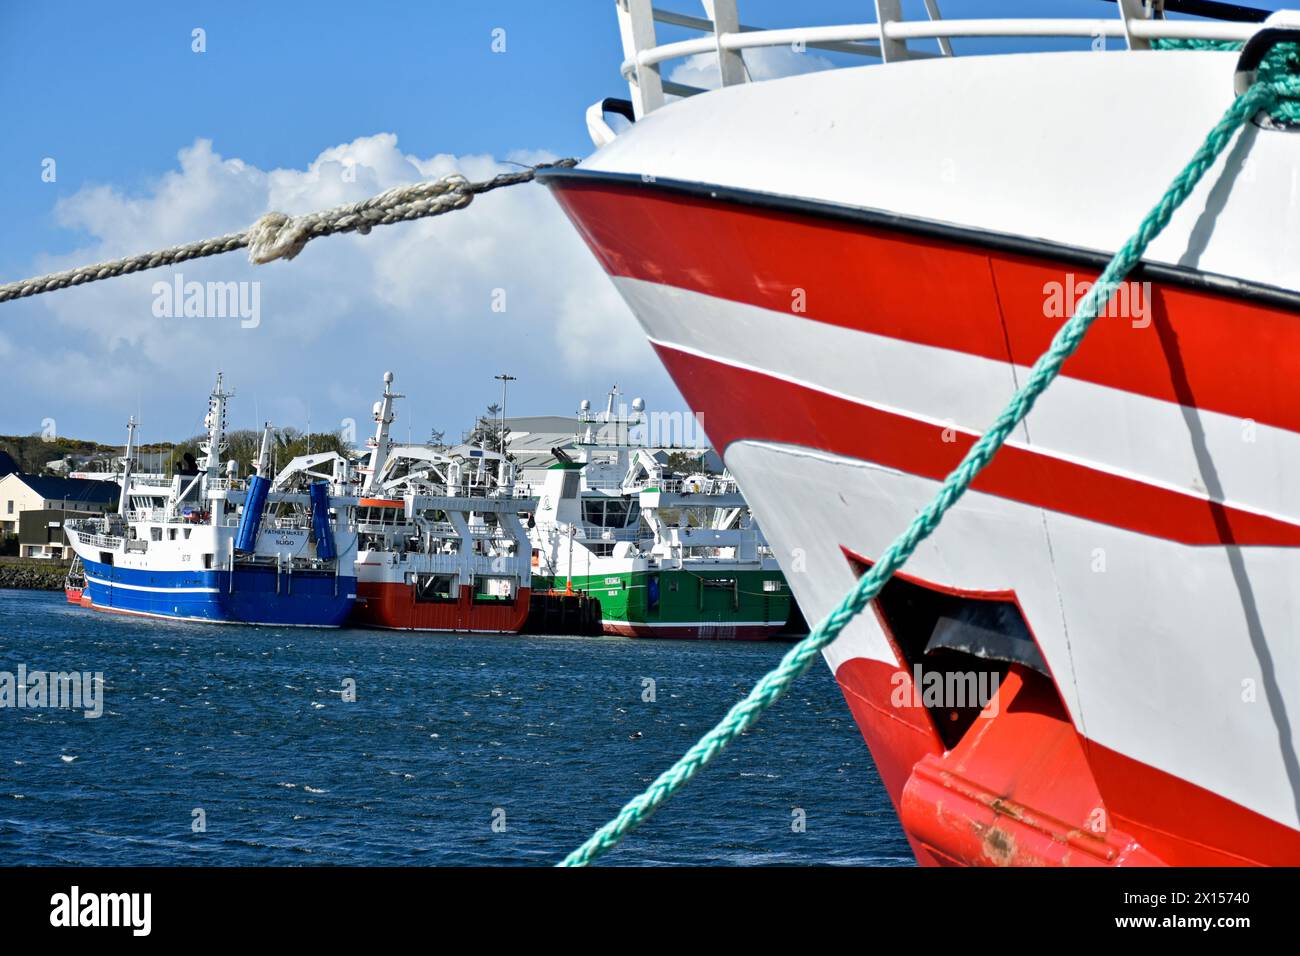 Fishing trawlers in Killybegs harbour, County Donegal, Ireland. Stock Photo